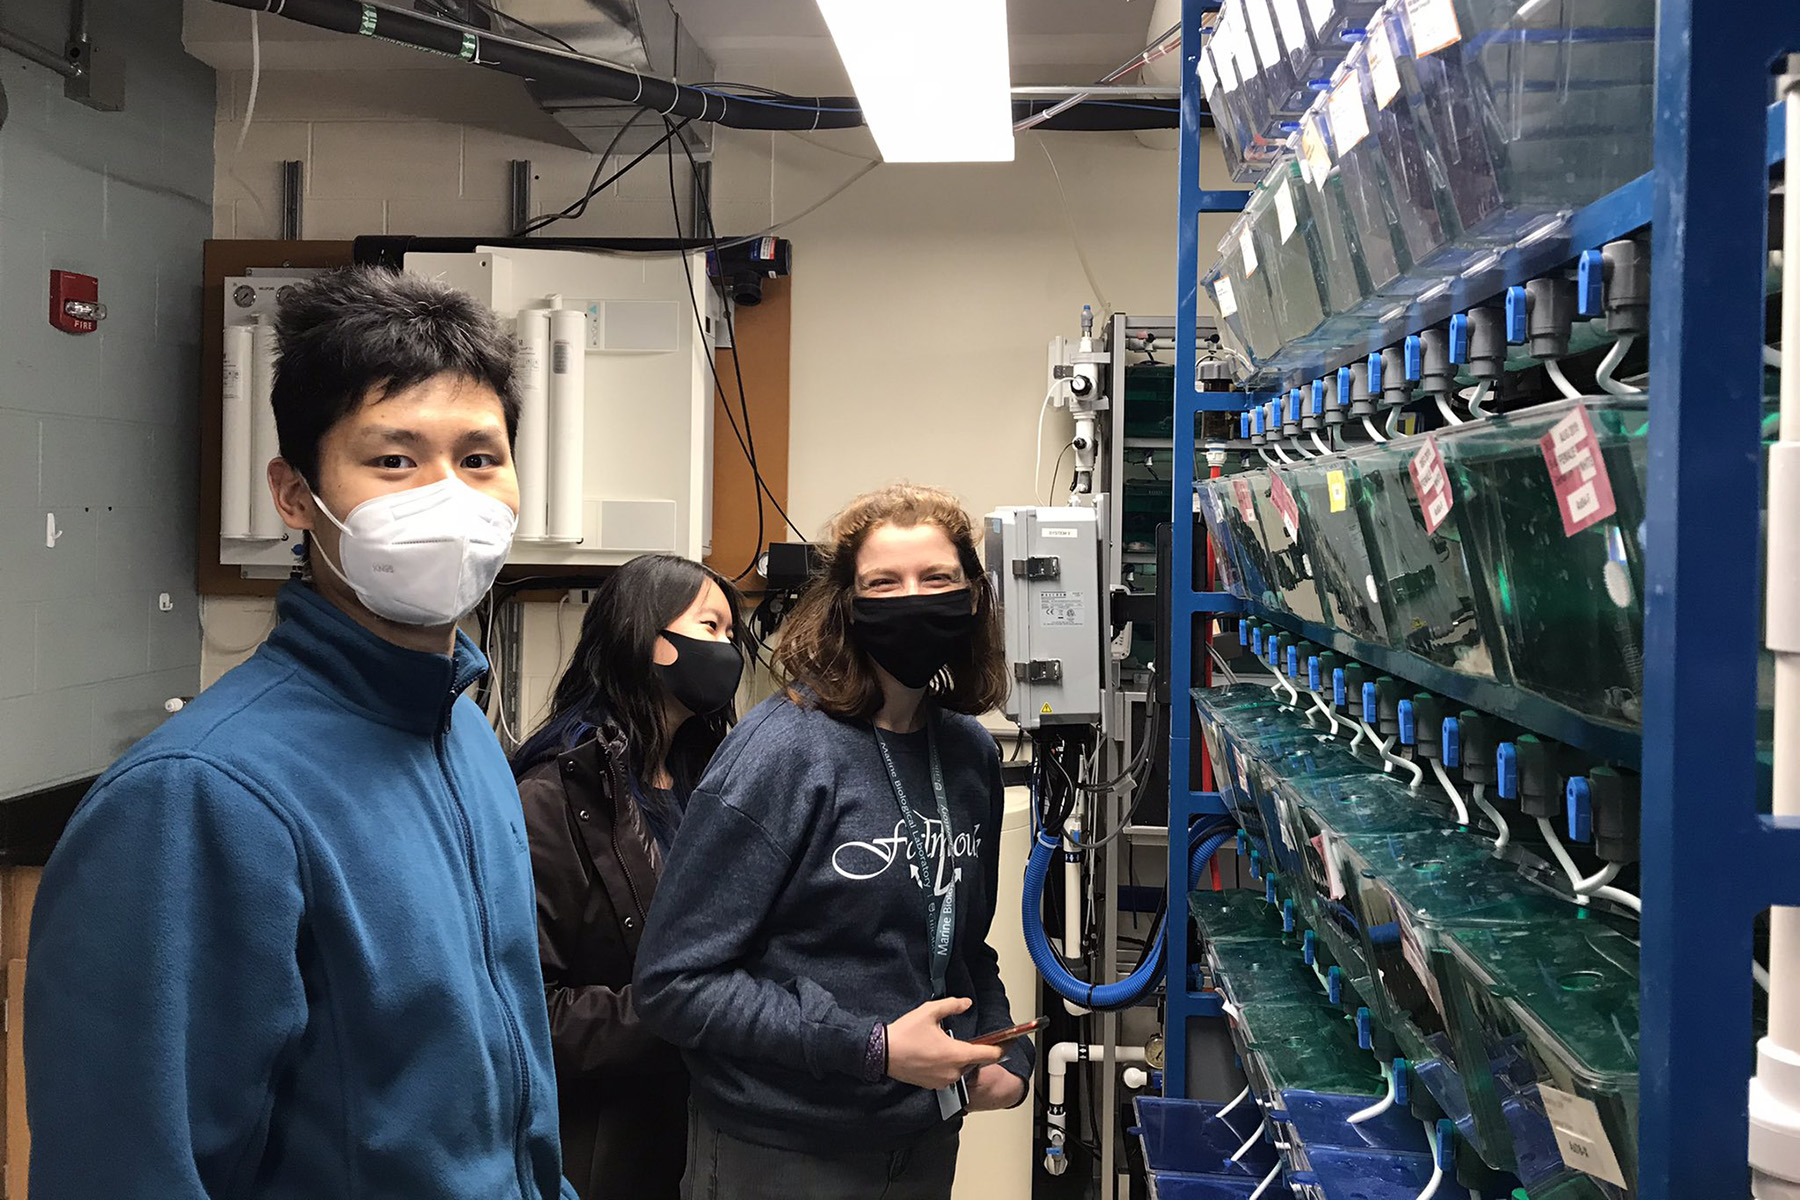 Axolotls are masters of regeneration and students in the UChicago Spring Quarter at MBL toured course director Karen Echeverri’s axolotl facilities during the Stem Cells and Regeneration course. 